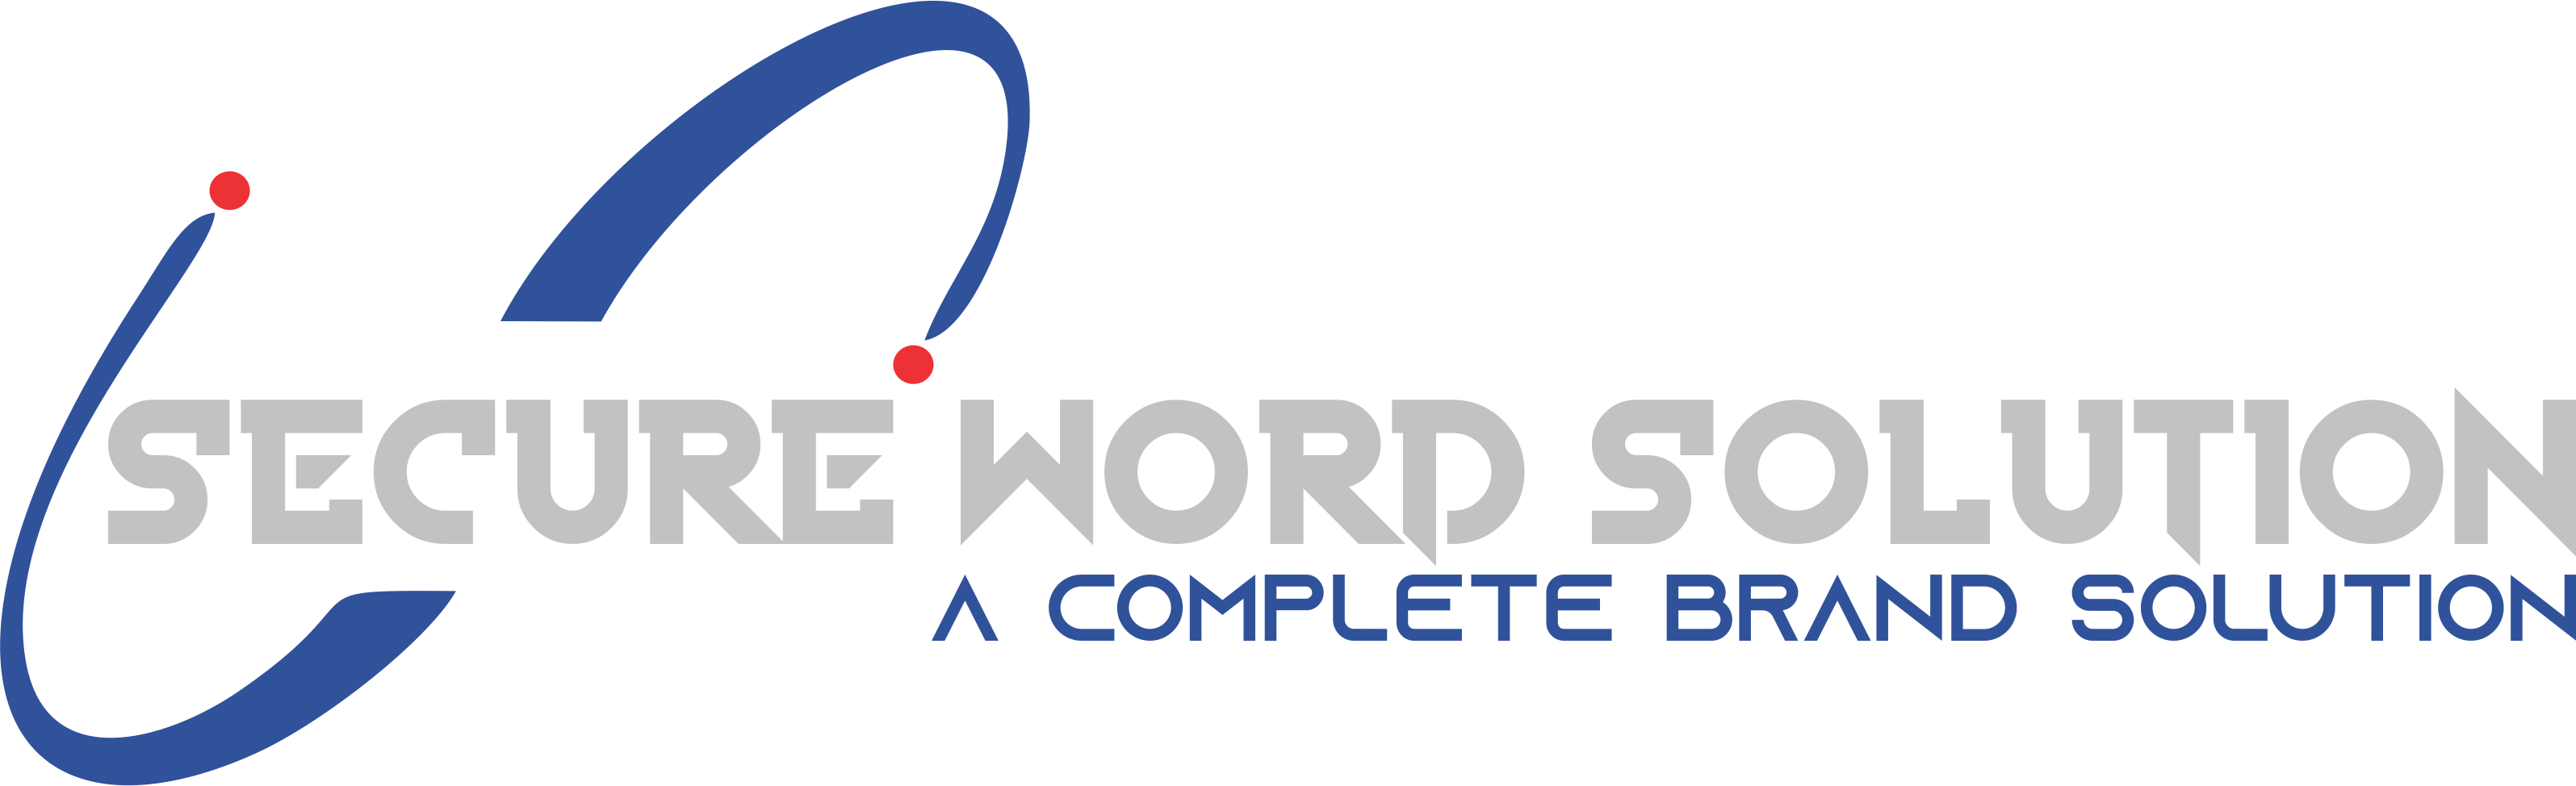 secure word solution